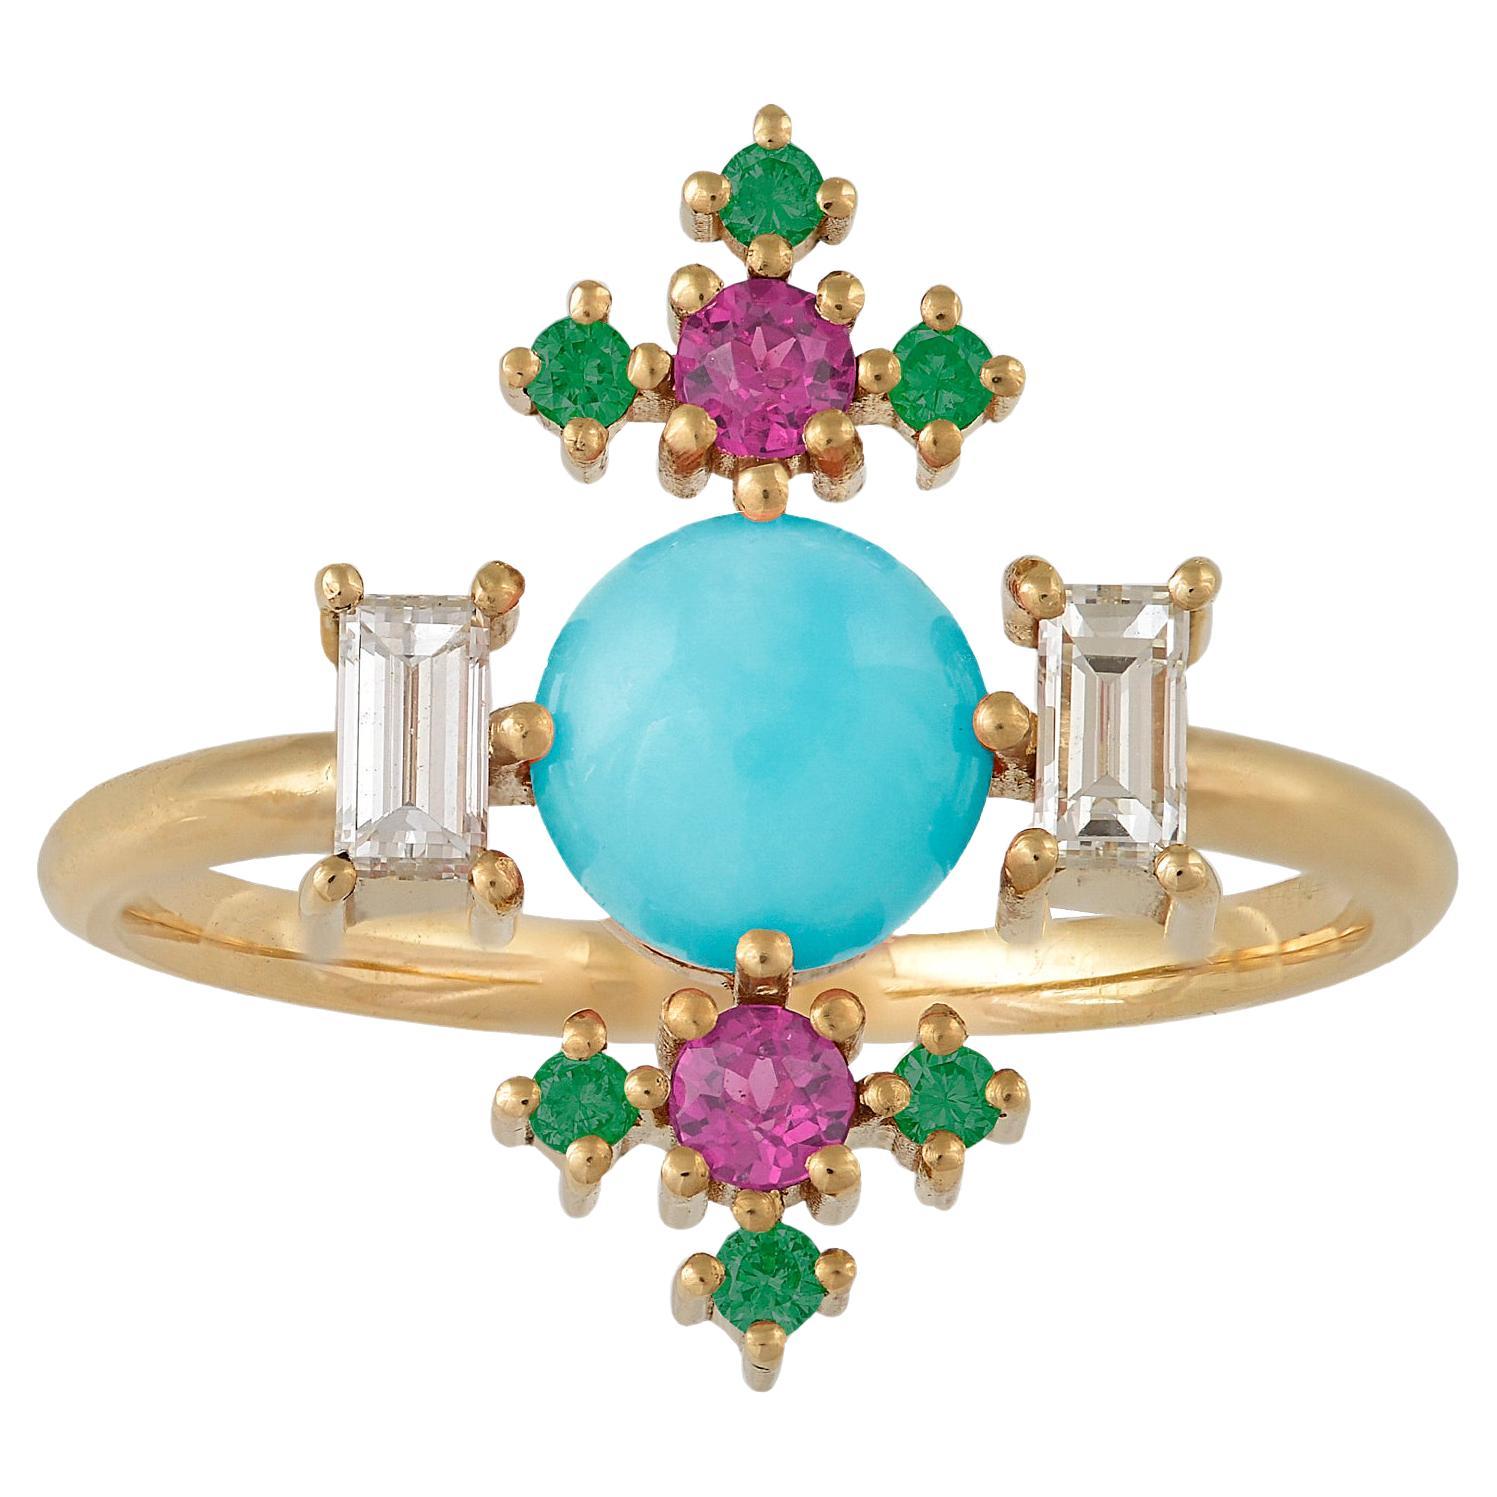 Colorful 18 Karat Gold Ring with Diamonds, Pink Sapphires, Emeralds, Turquoise